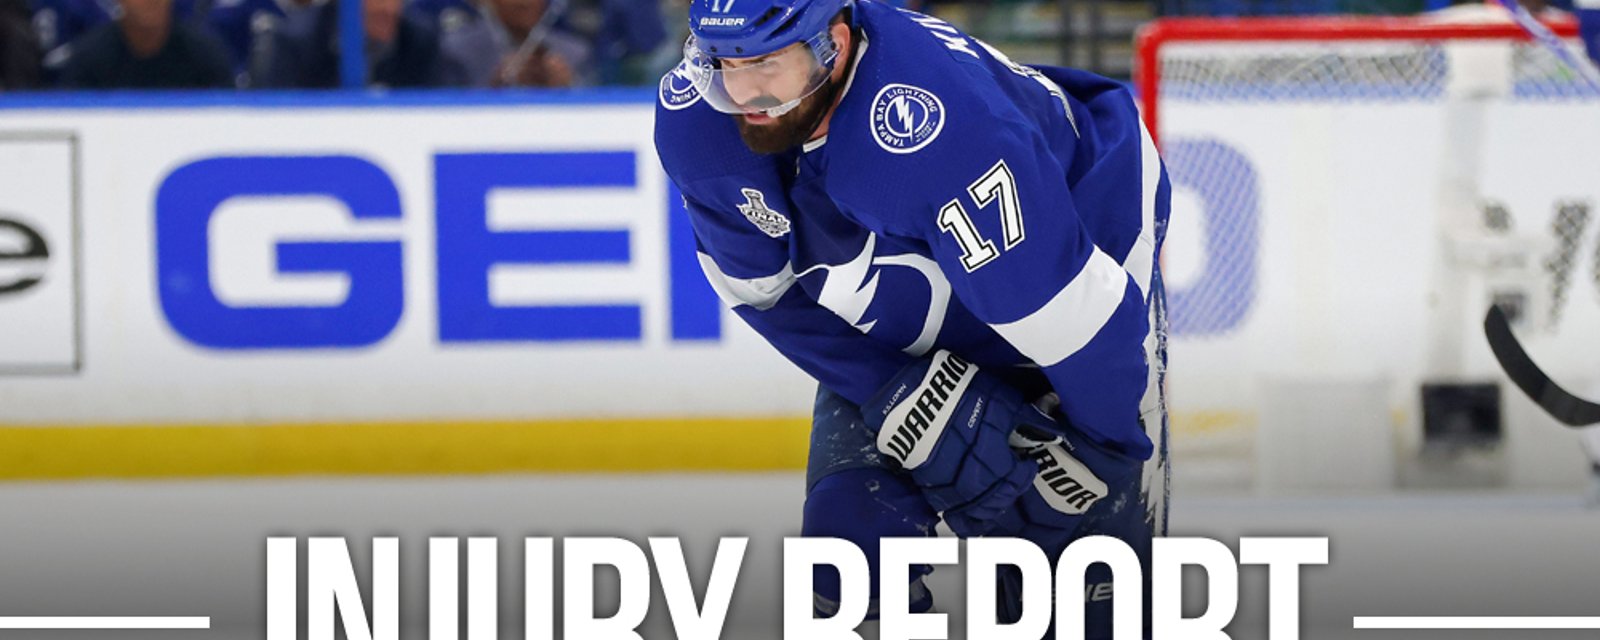 Coach Cooper provides an update on Alex Killorn for Game 3